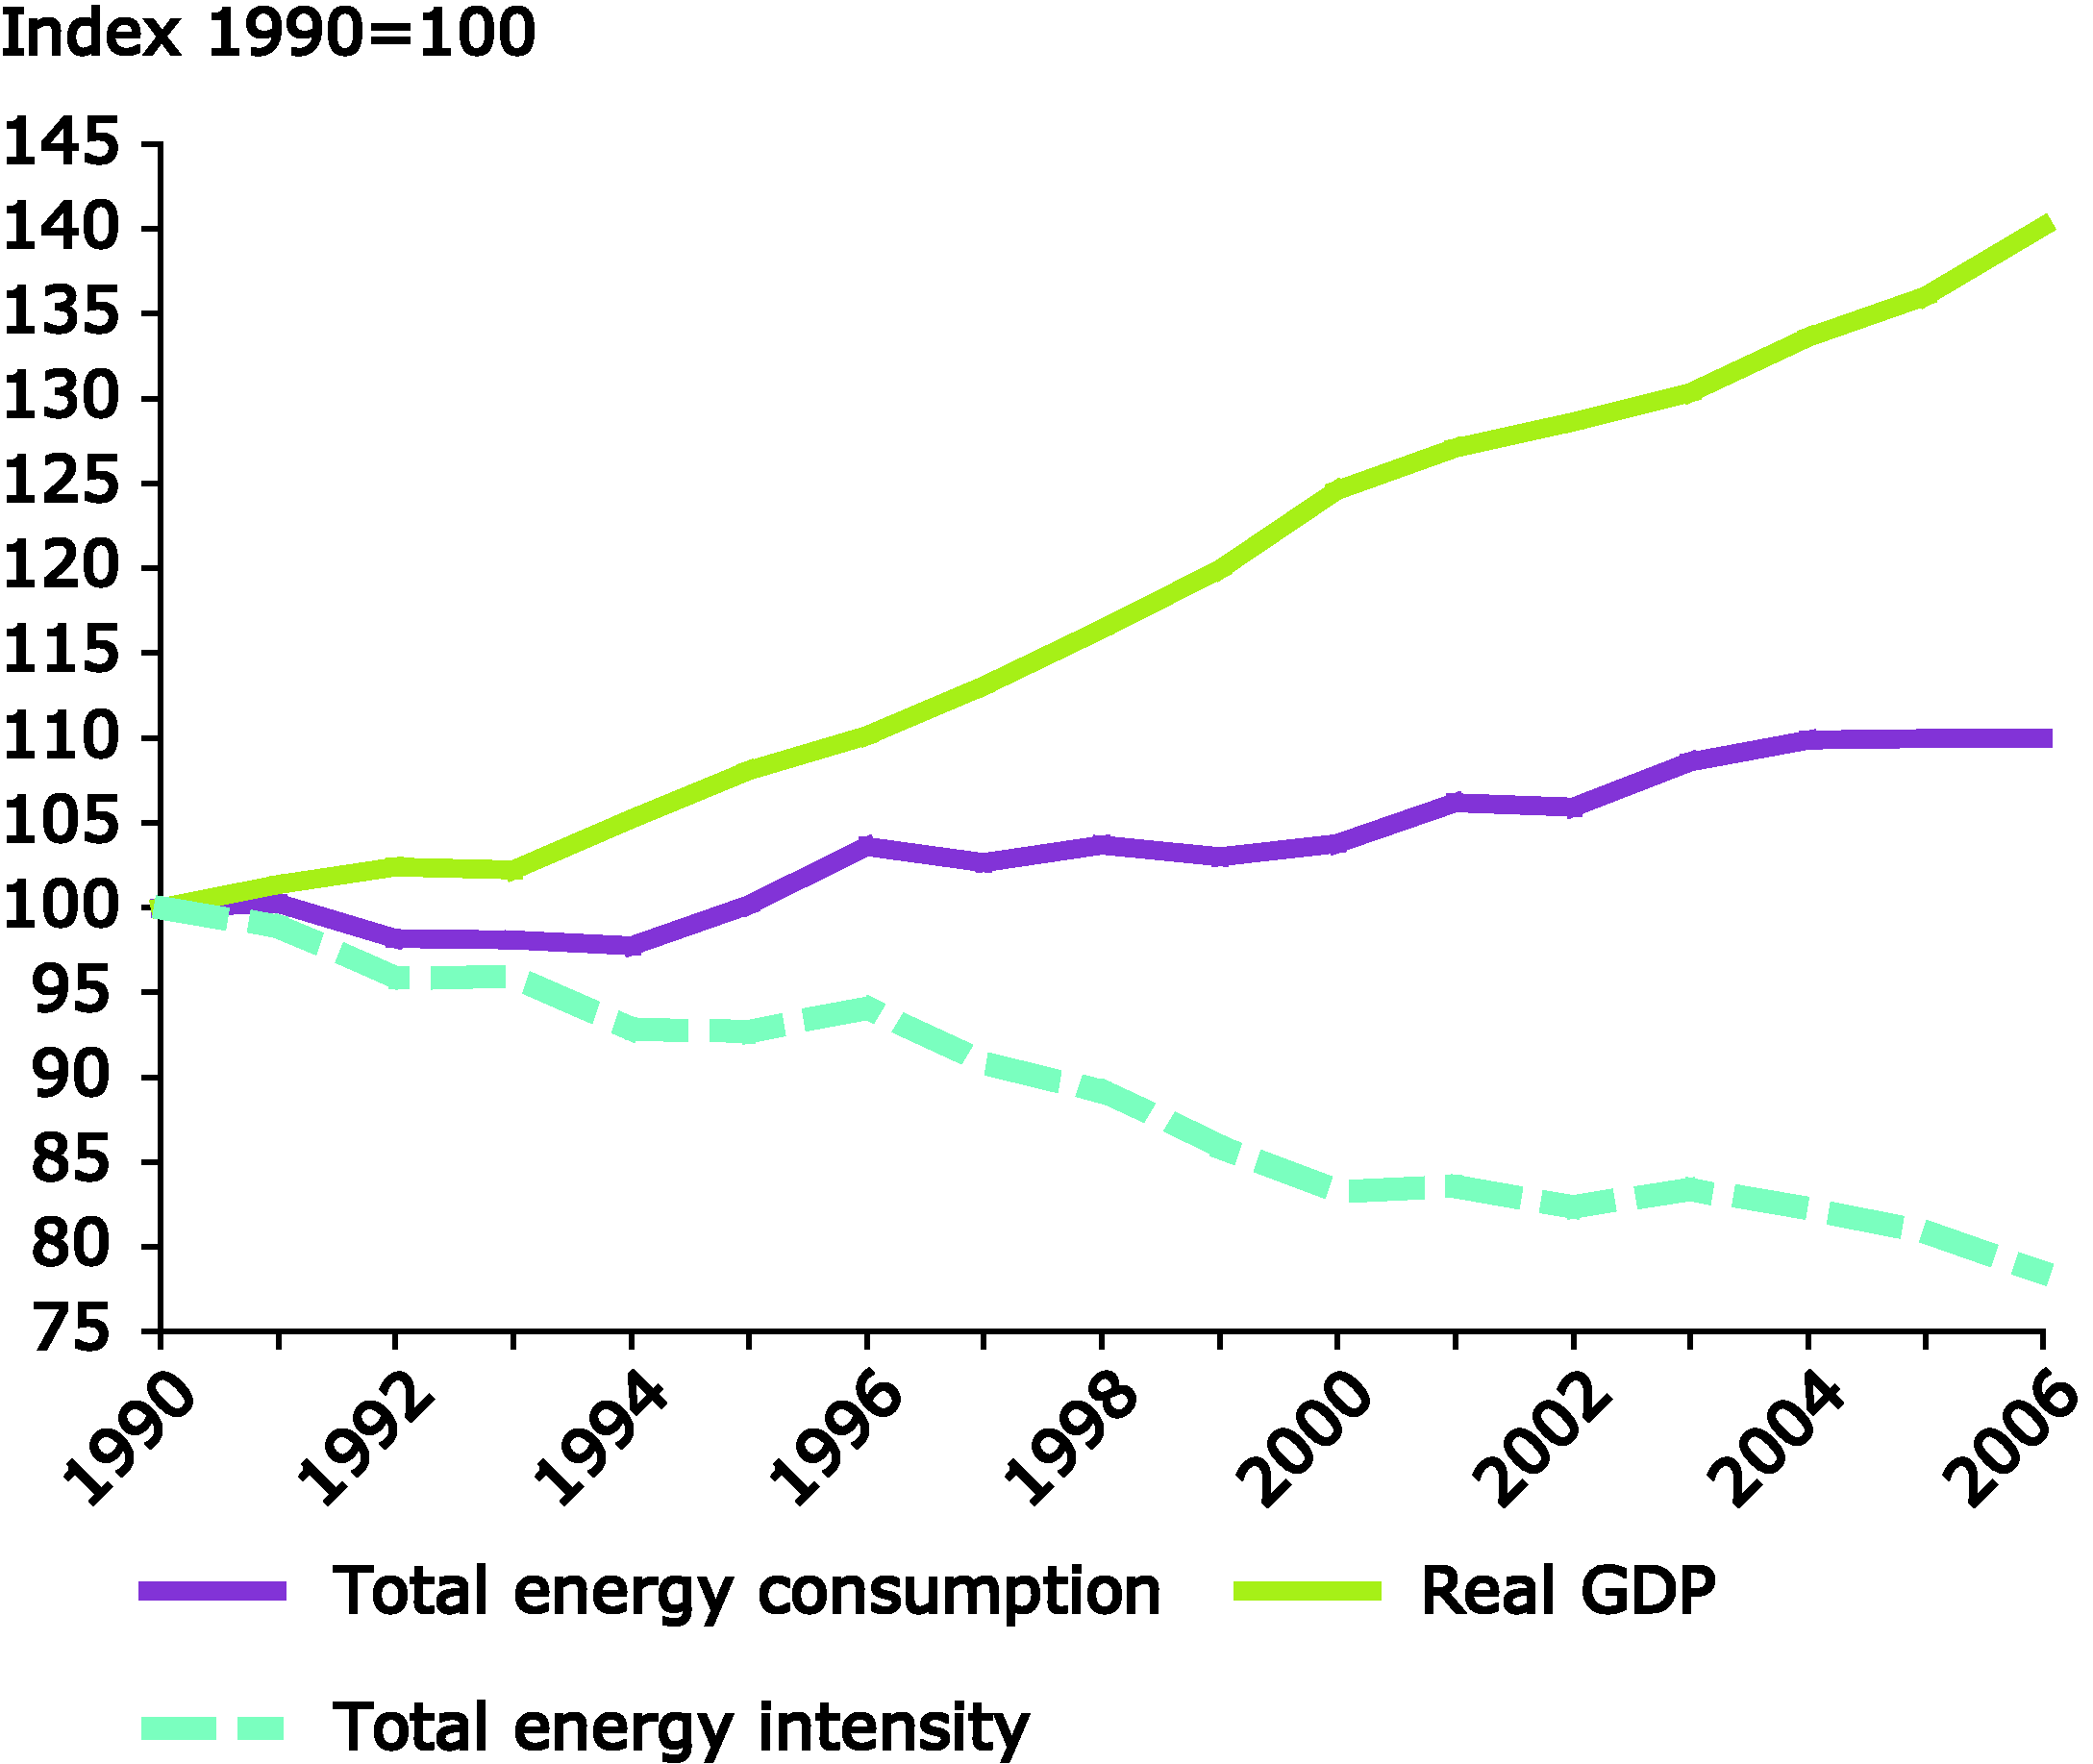 Trends in total energy intensity, gross domestic product and total energy consumption, EU-27